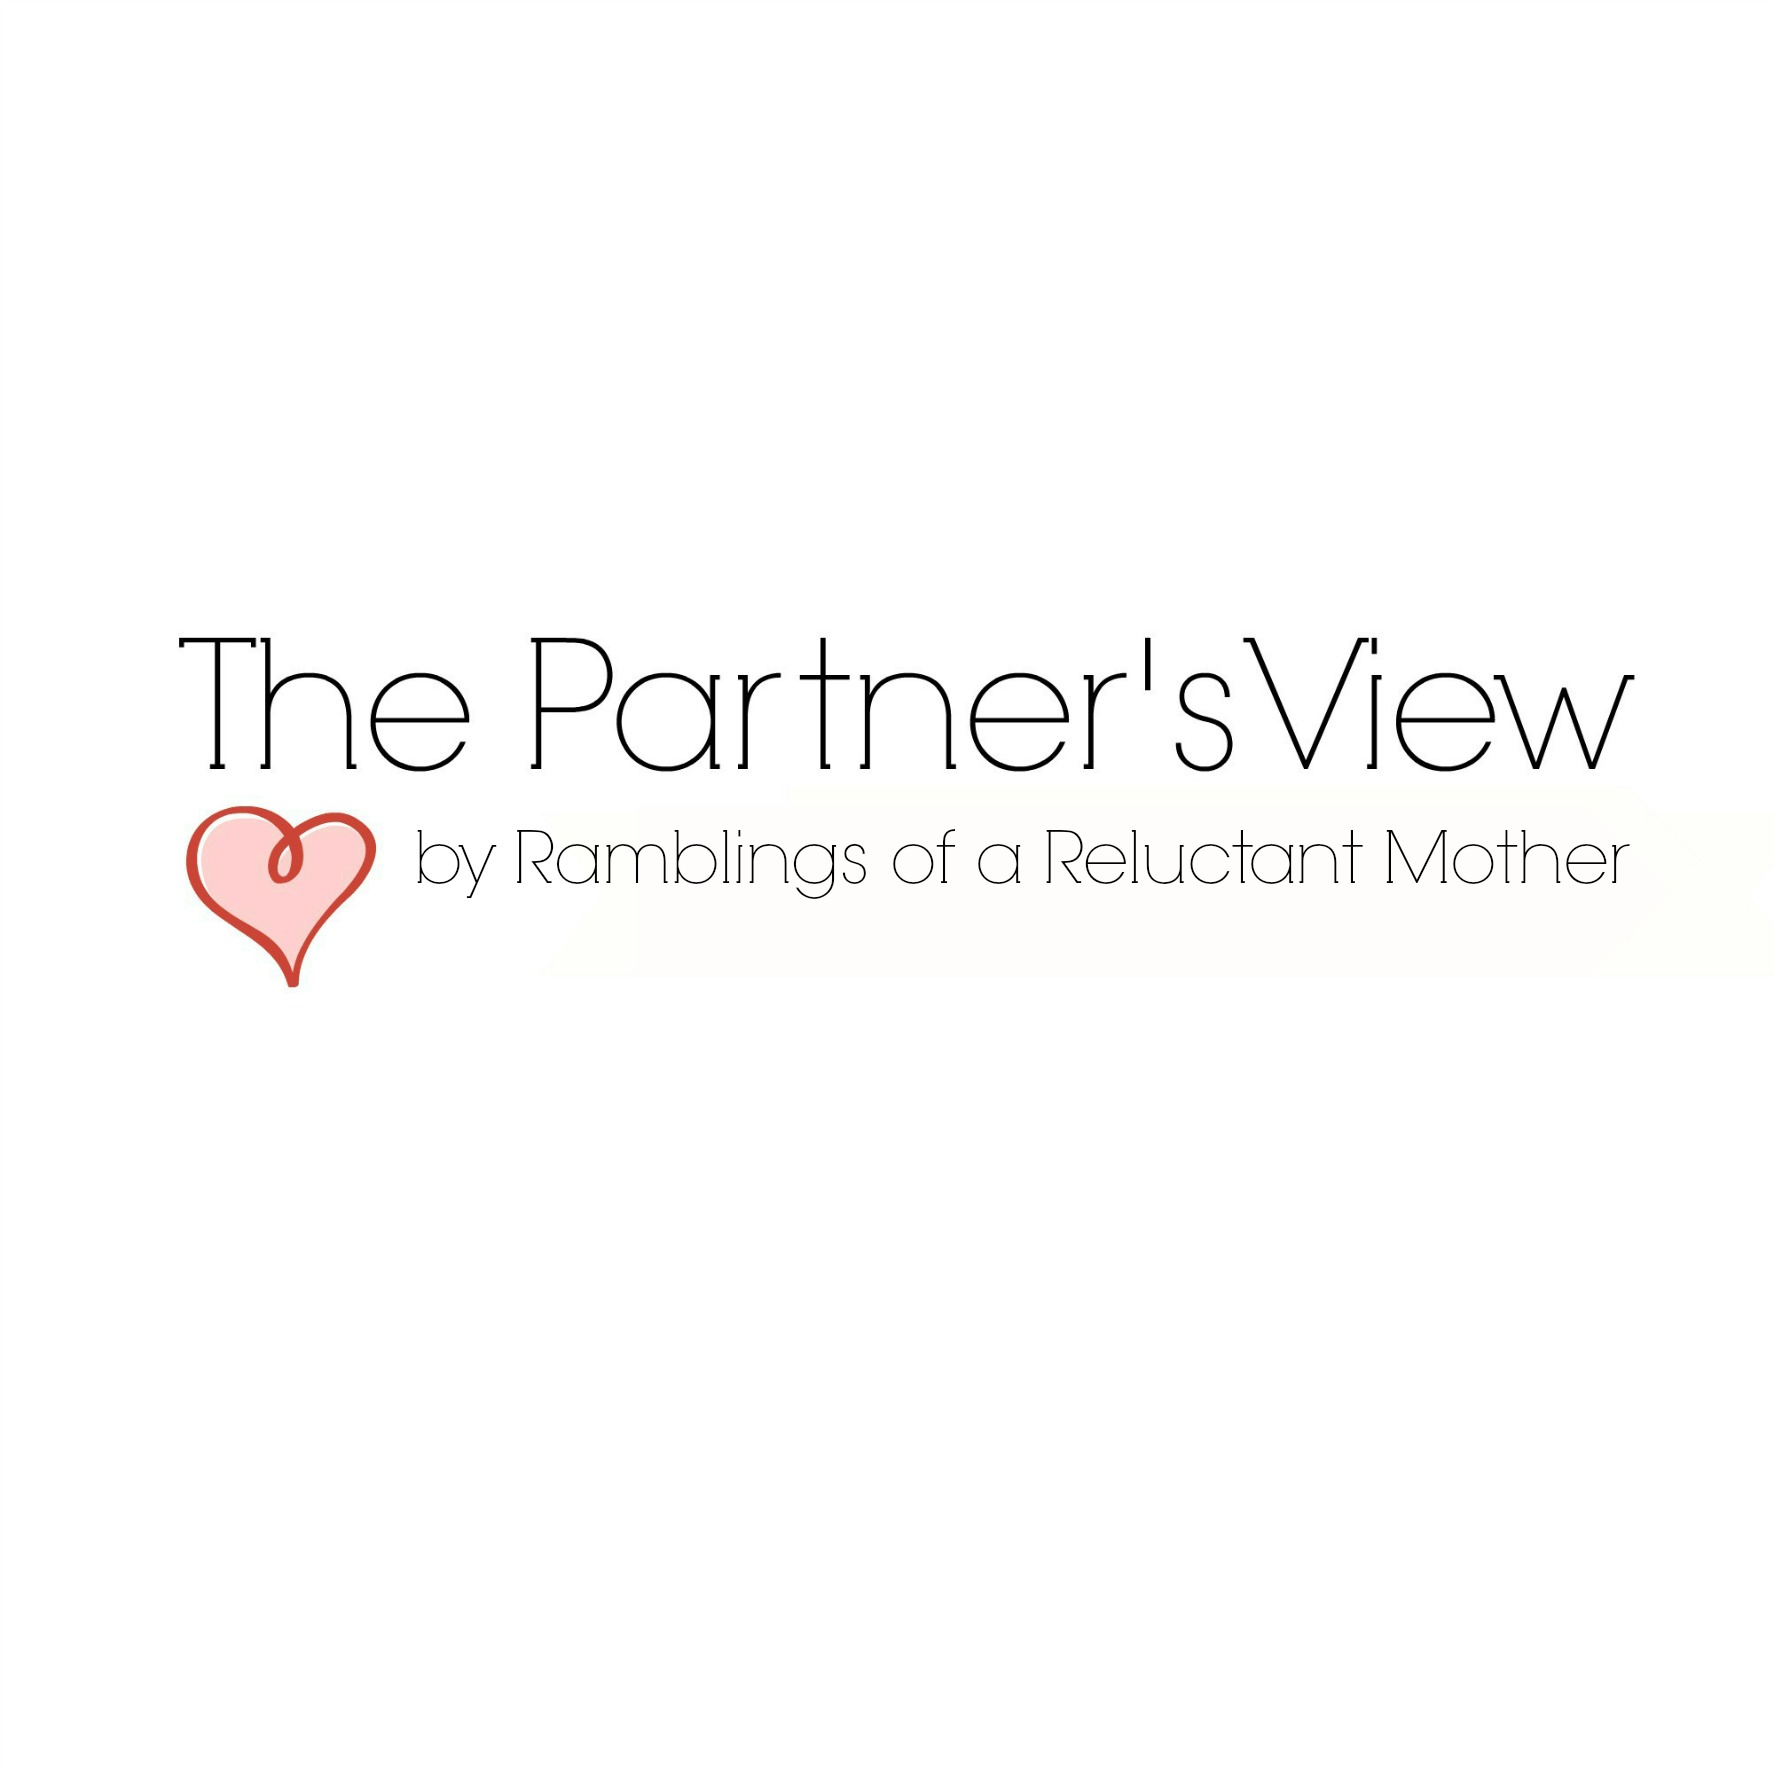 The Partner's View Ramblings of a Reluctant Mother